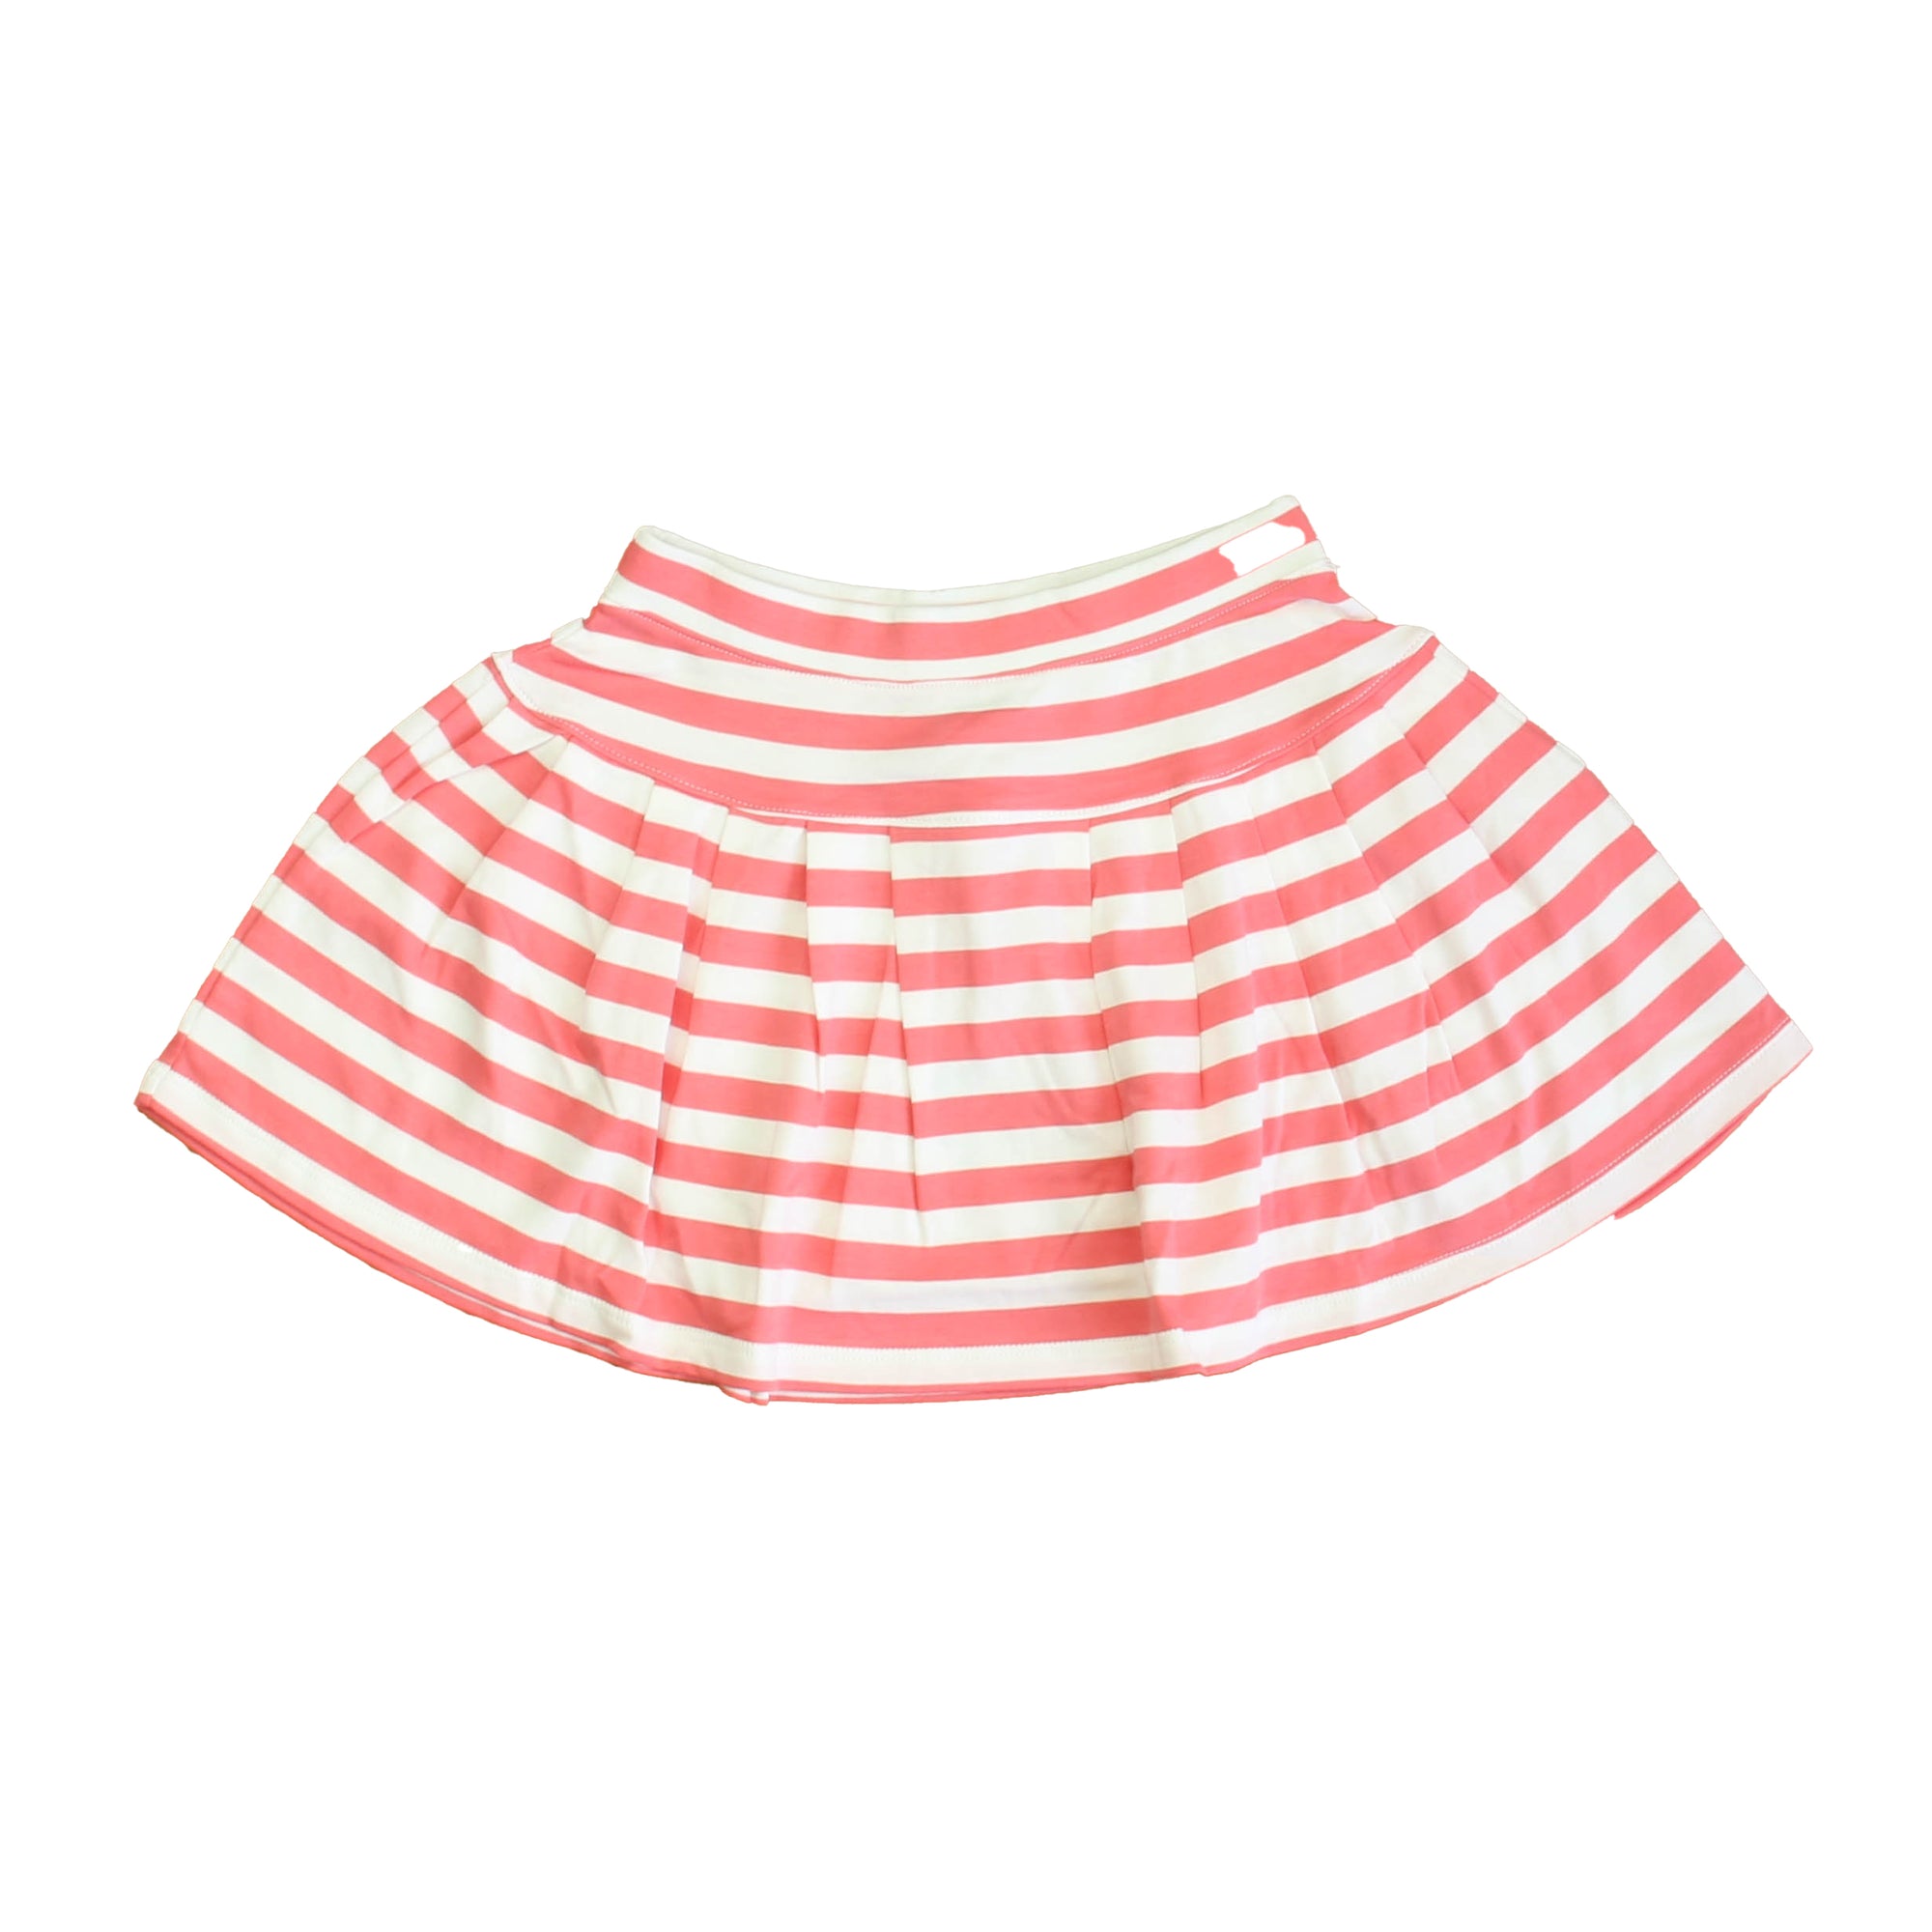 Sunkissed Coral | Bright White Stripe / 7 Years